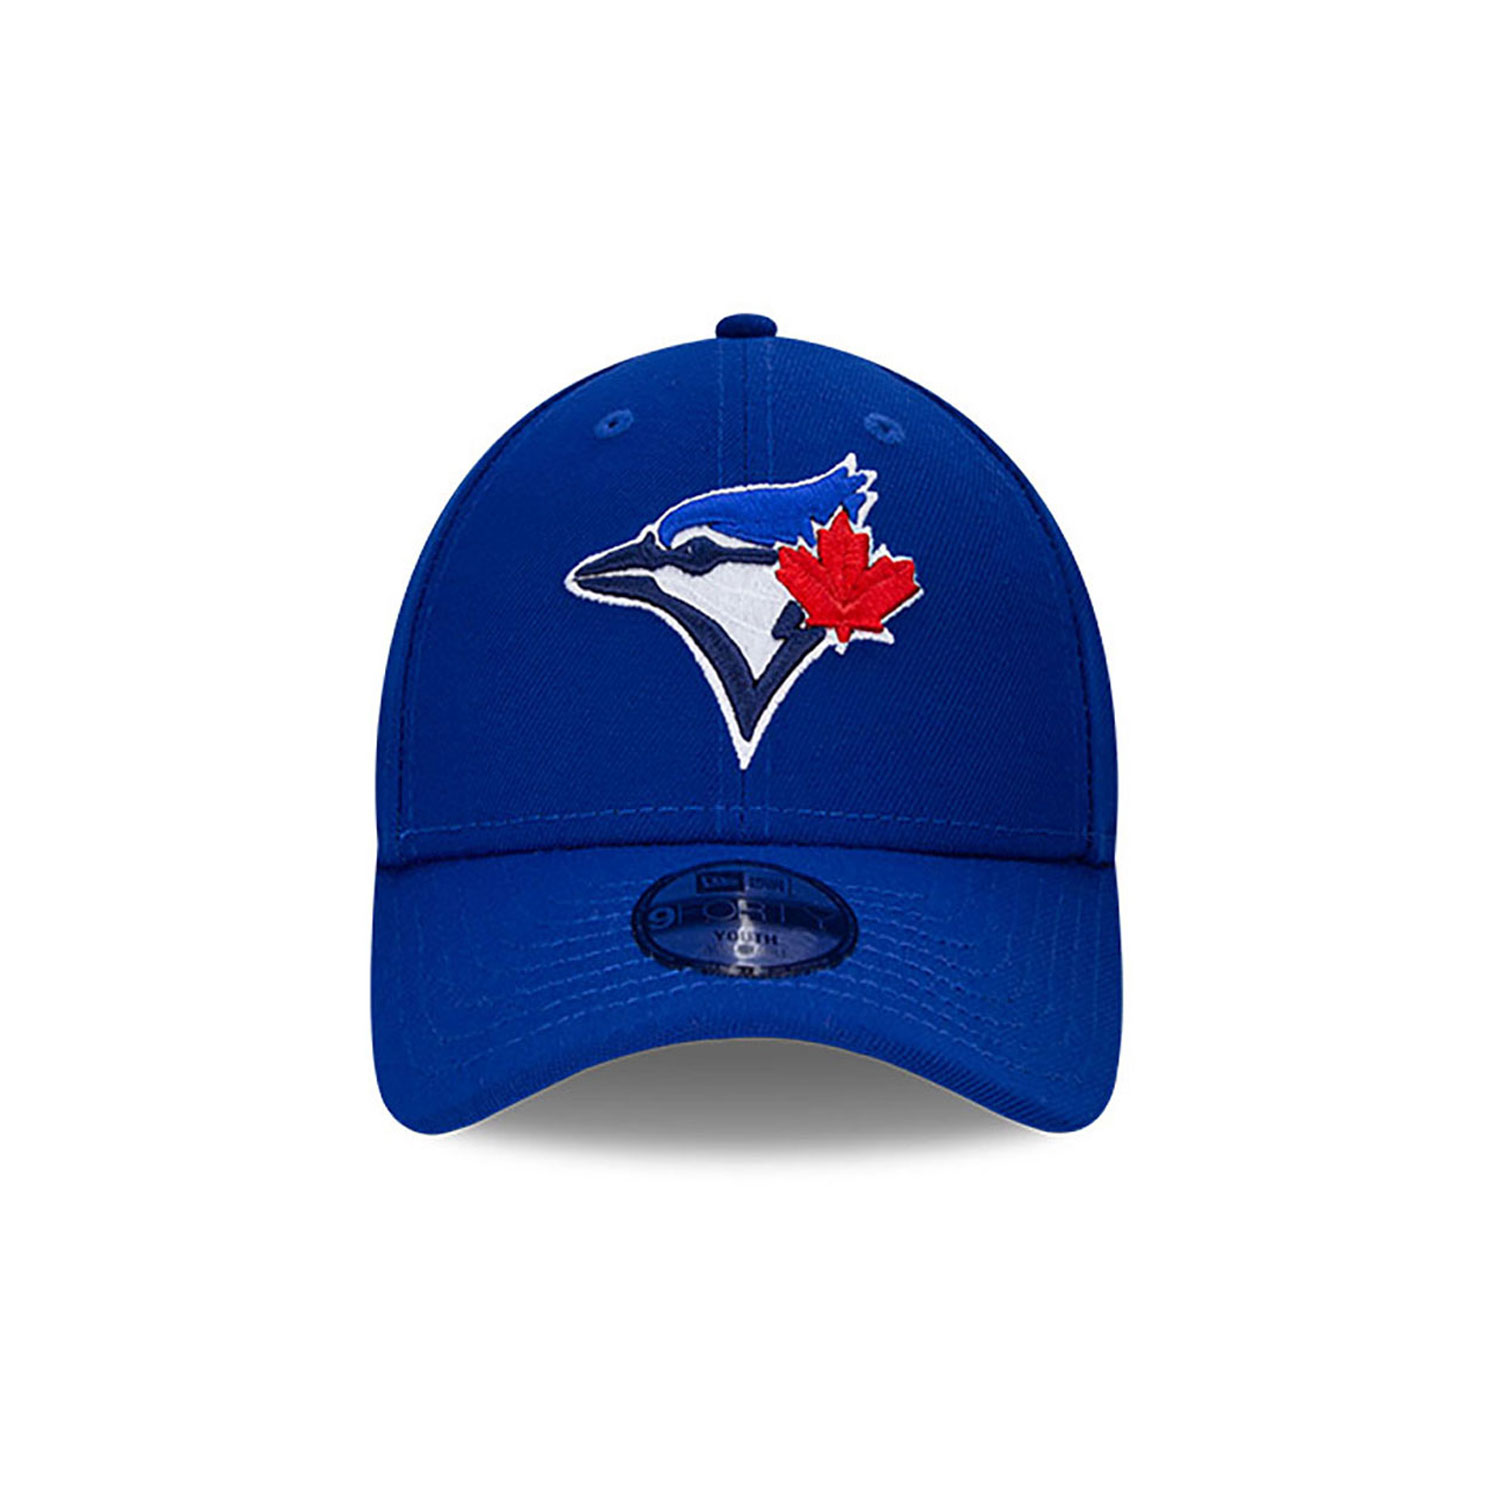 Toronto Blue Jays Youth The League Blue 9FORTY Adjustable Cap